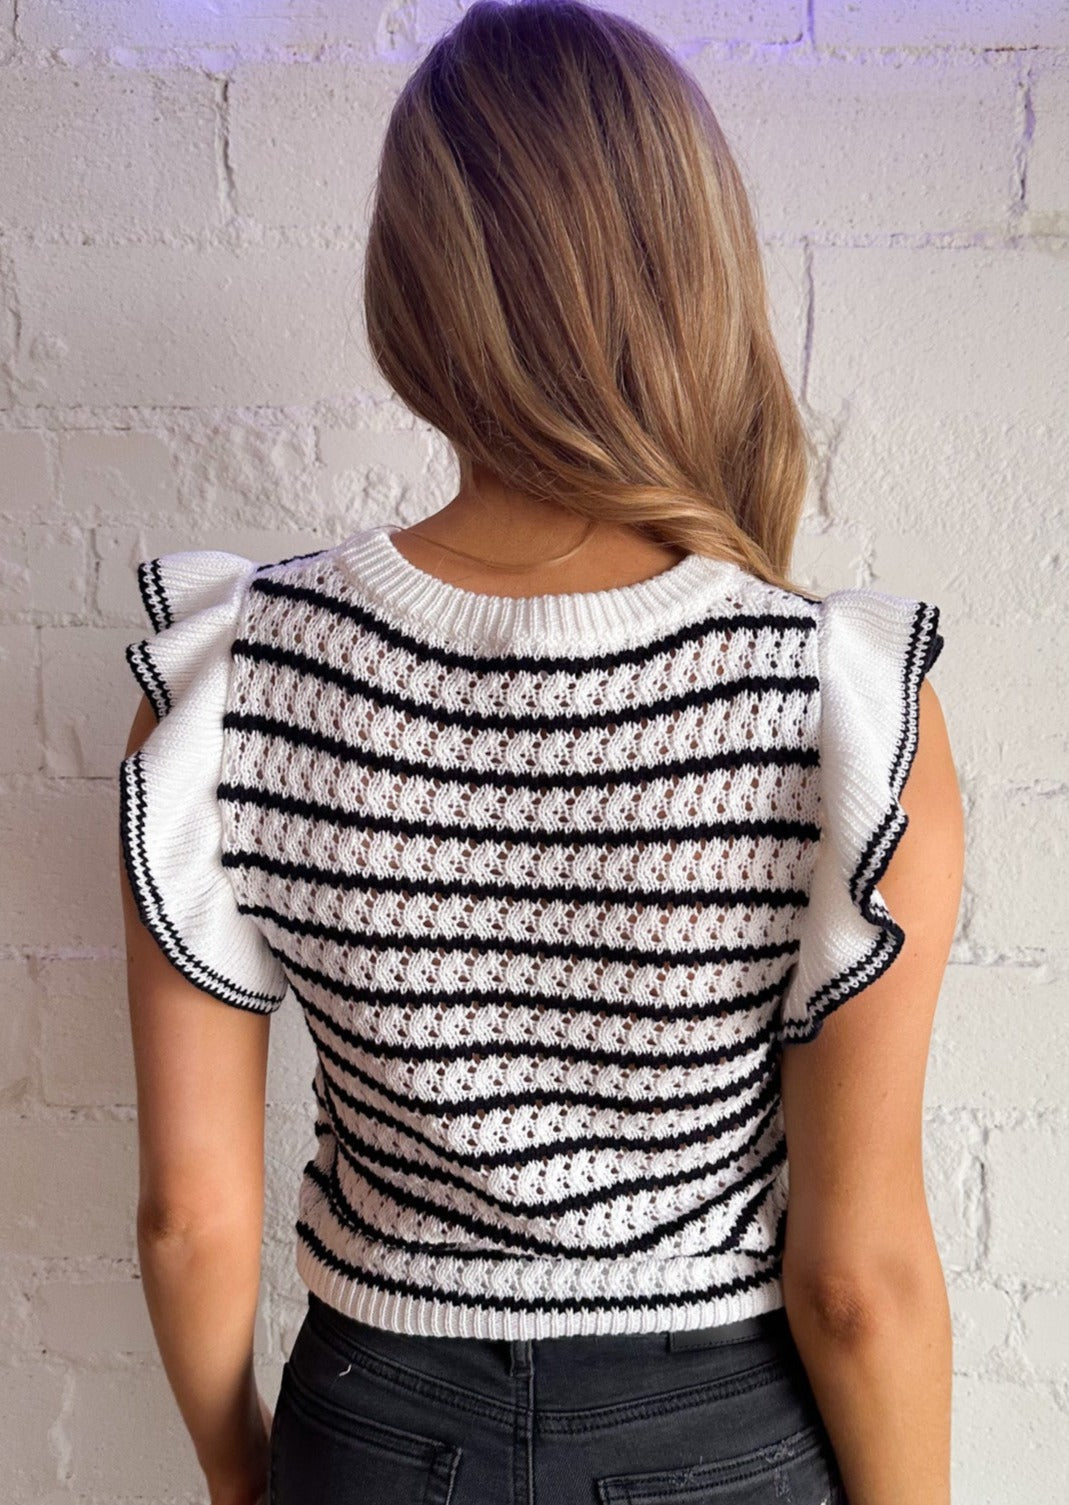 Nautical Spring Top, Tops, Adeline, Adeline, dallas boutique, dallas texas, texas boutique, women's boutique dallas, adeline boutique, dallas boutique, trendy boutique, affordable boutique